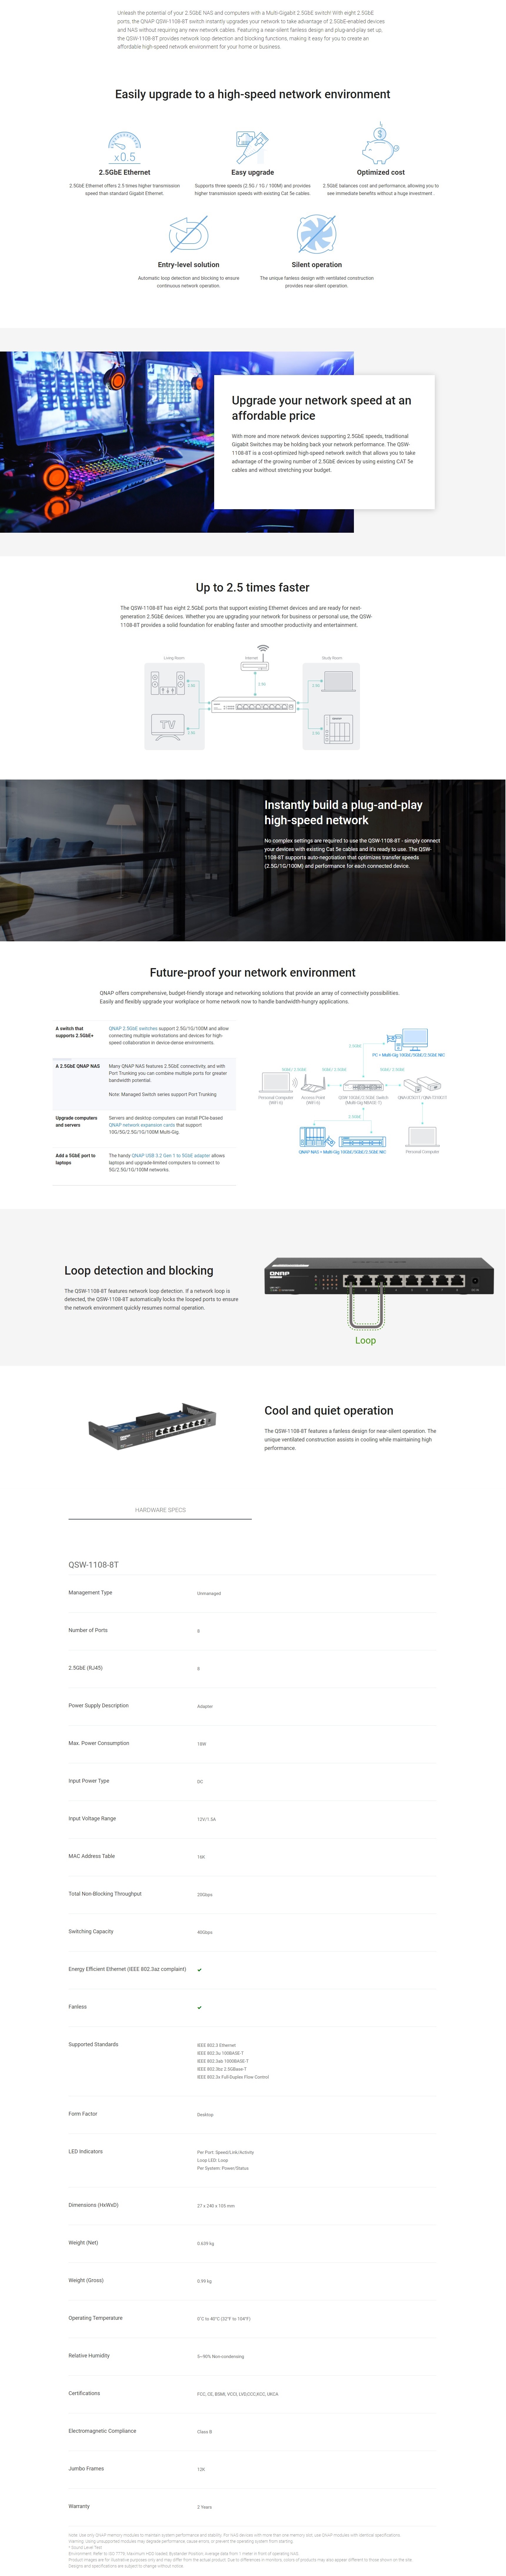 A large marketing image providing additional information about the product QNAP QSW-1108-8T 2.5GbE 8-Port Network Switch - Additional alt info not provided